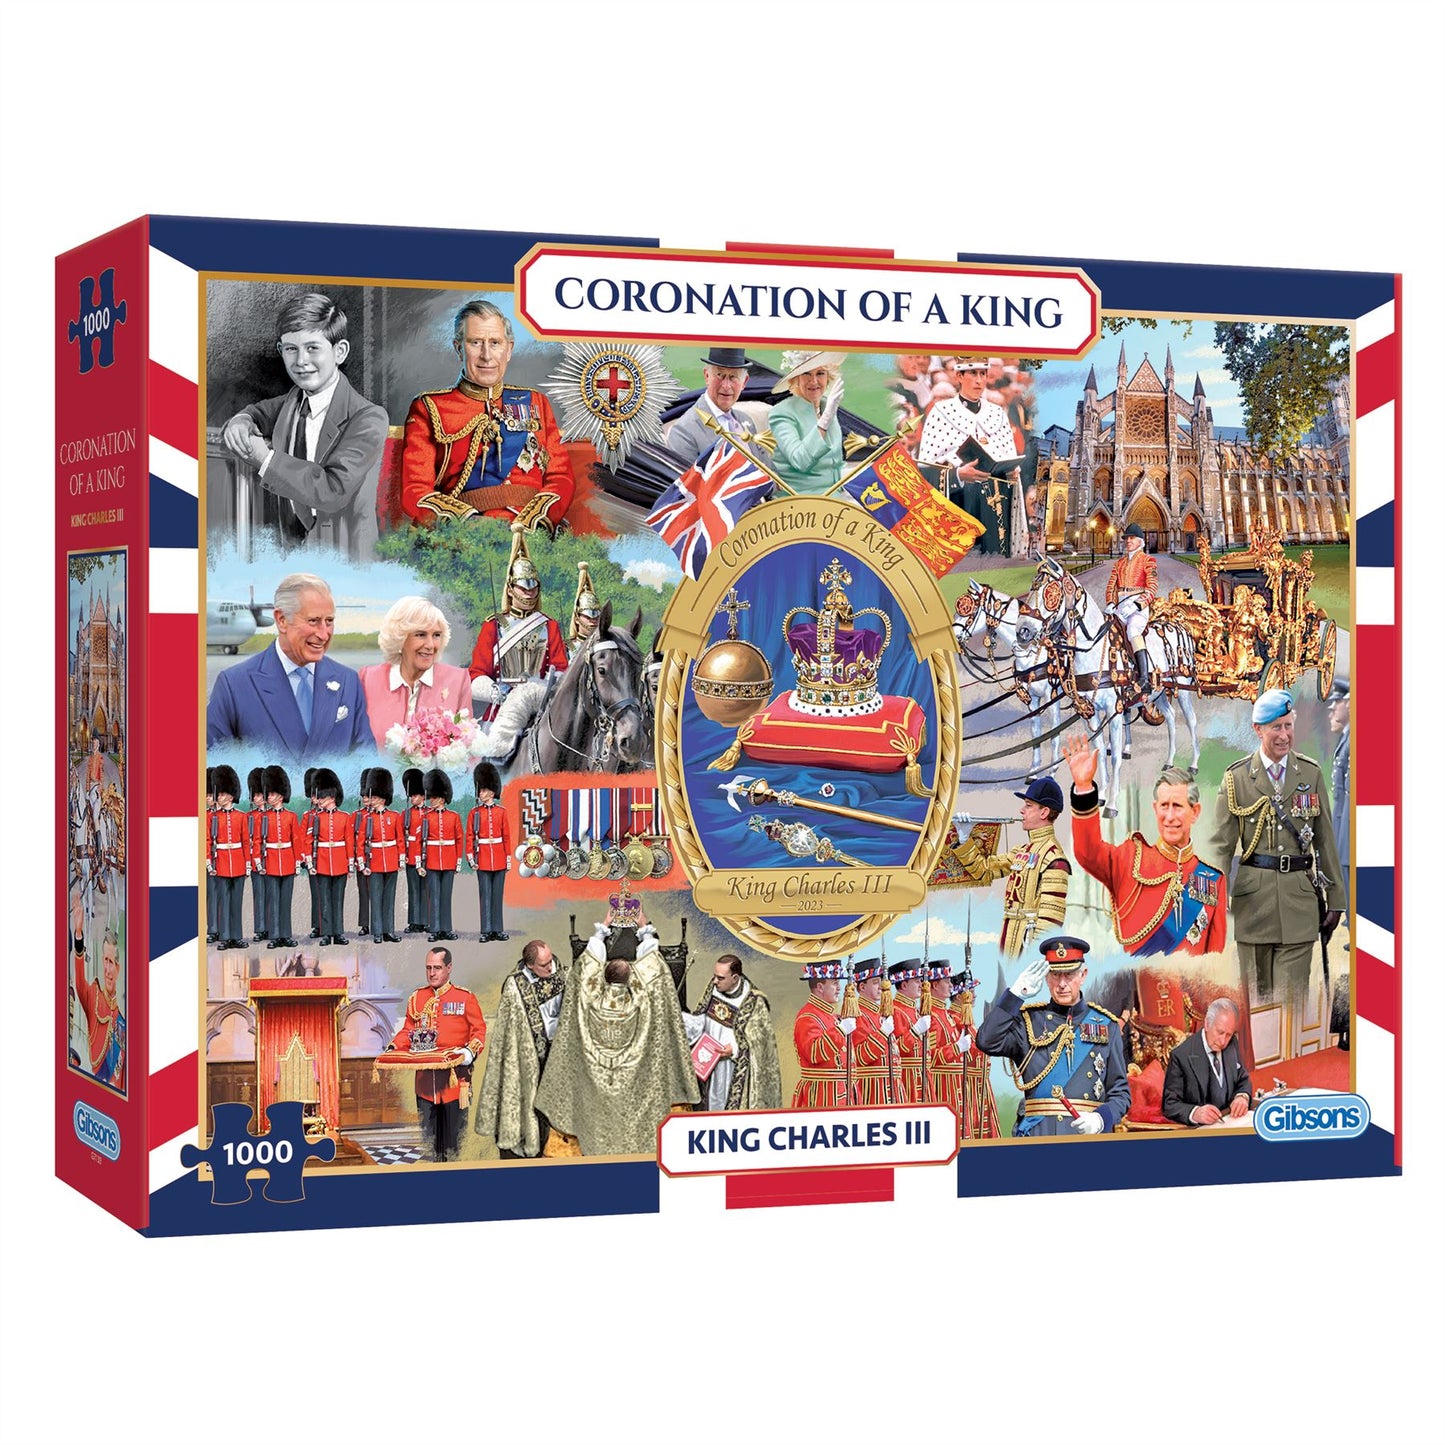 Coronation of a King 1000 Piece Jigsaw Puzzle by Gibsons